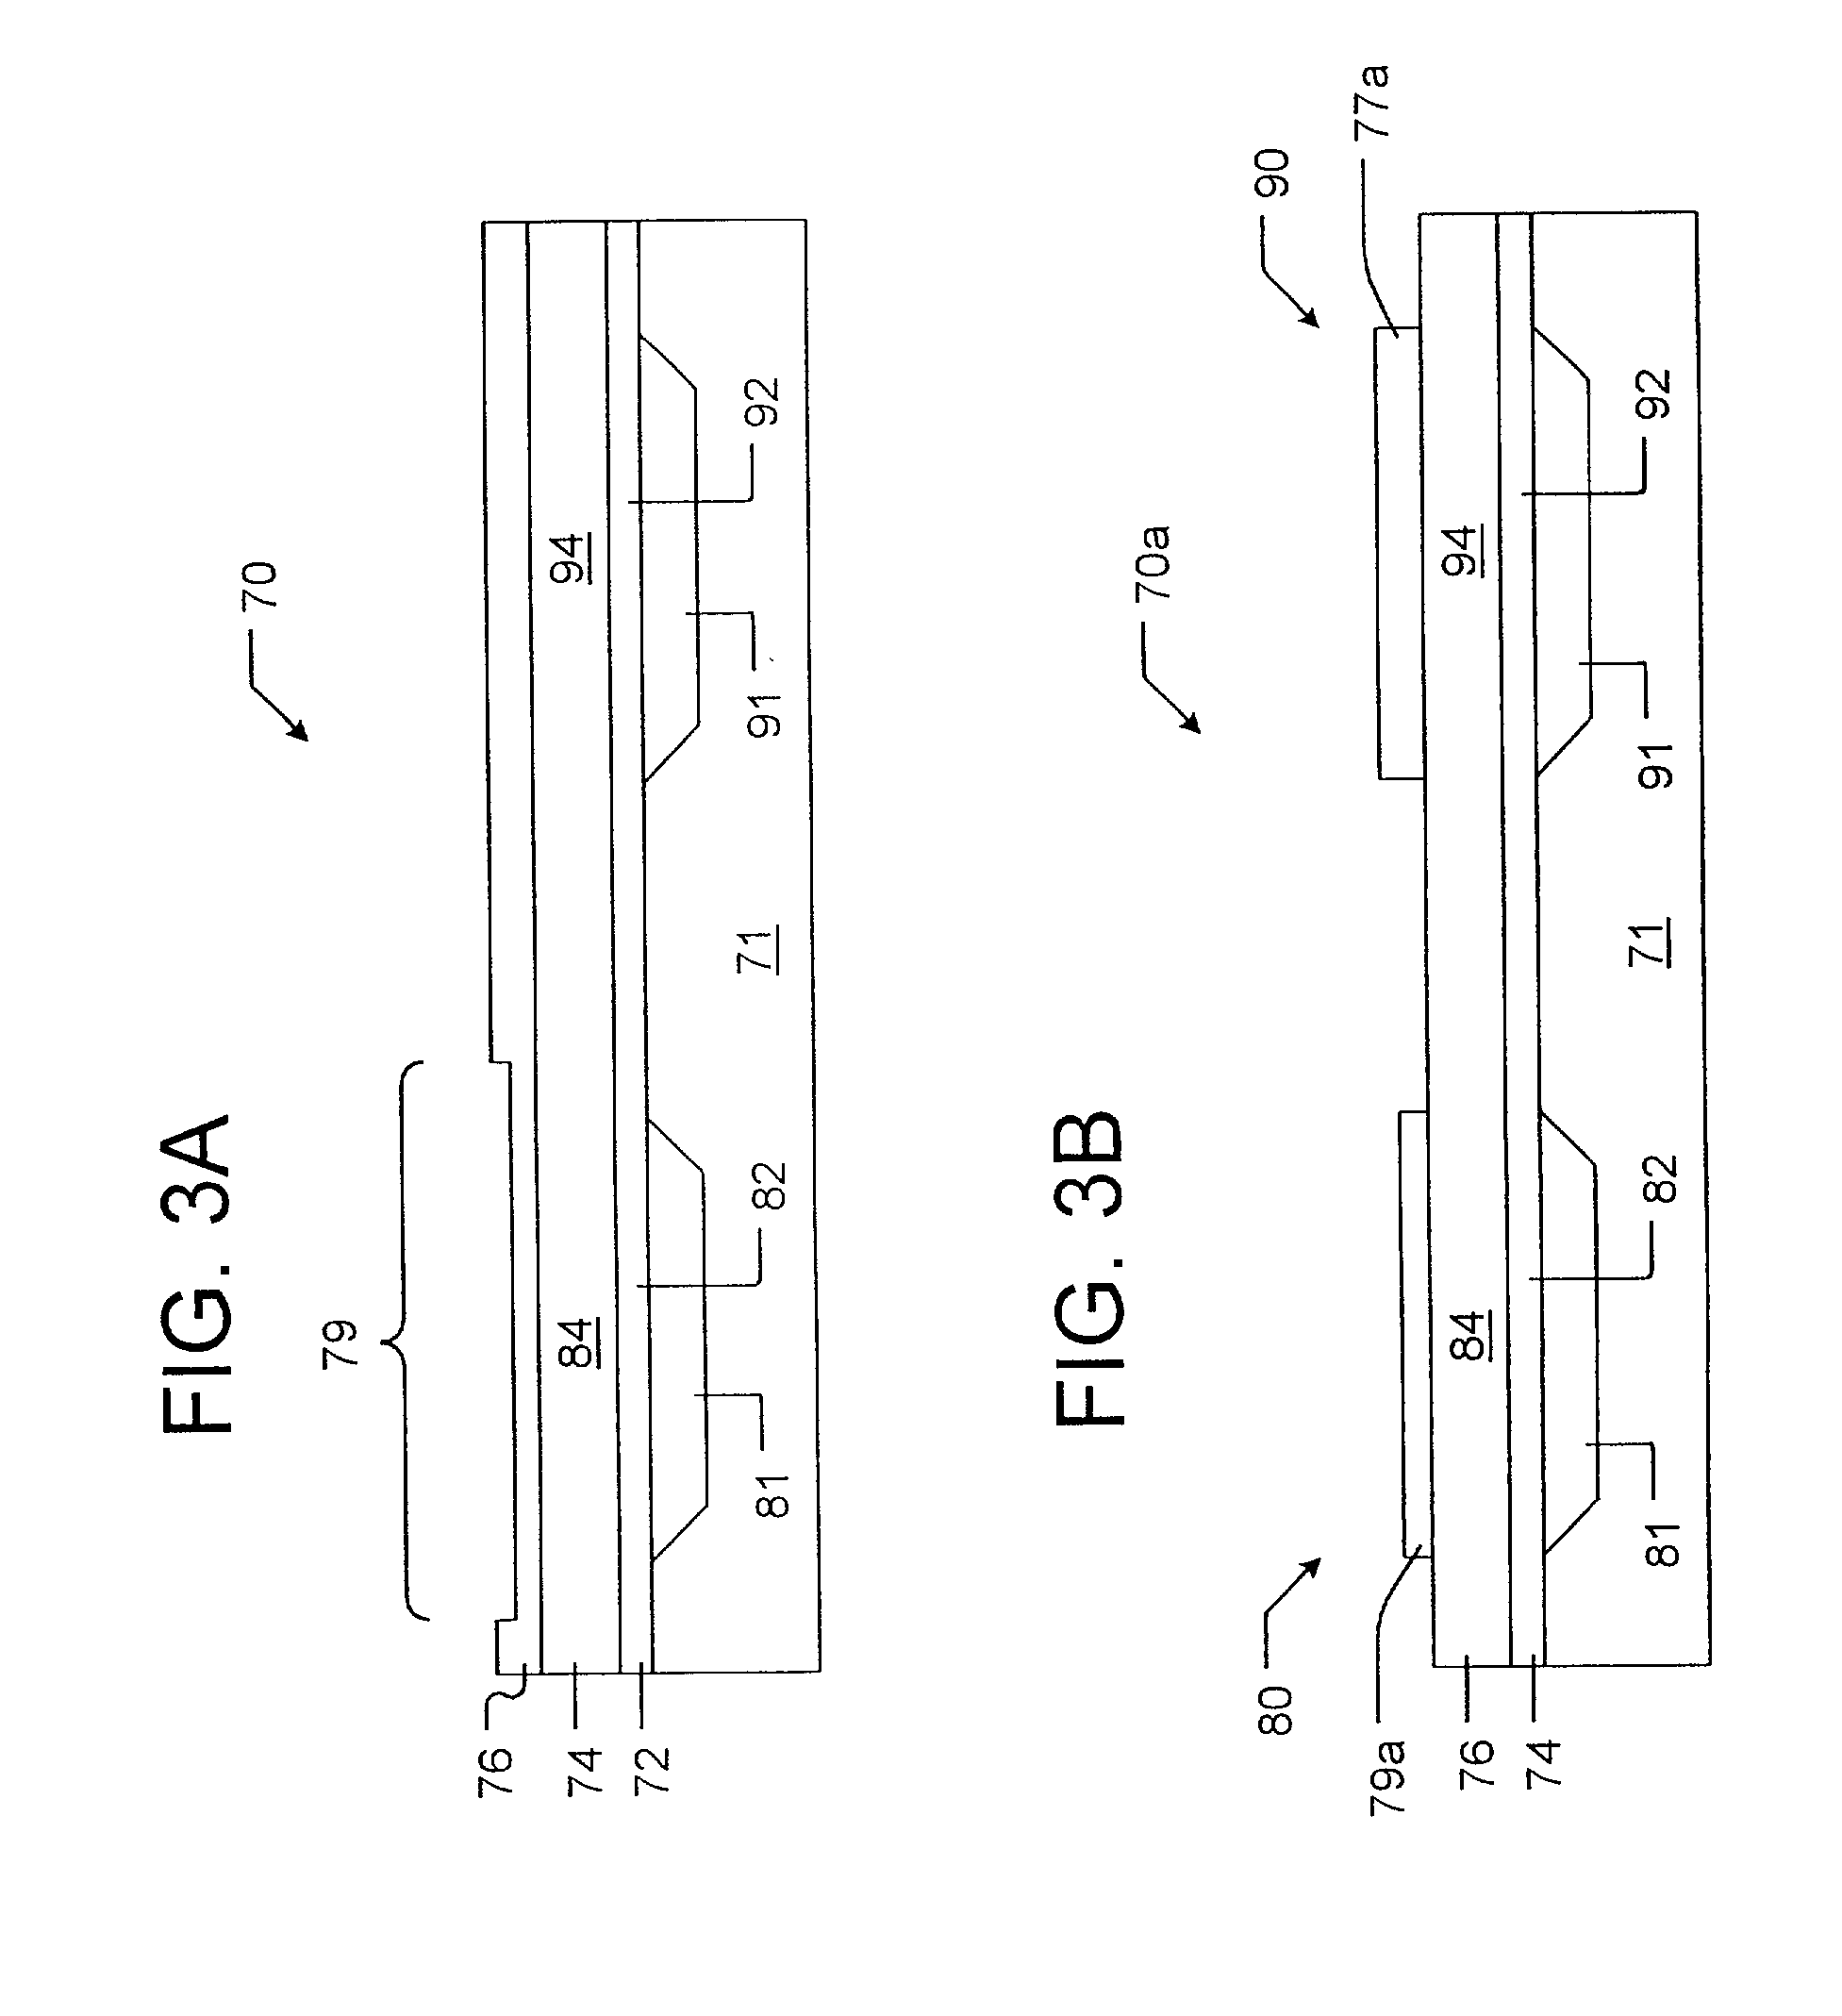 Method for producing thin film bulk acoustic resonators (FBARs) with different frequencies on the same substrate by subtracting method and apparatus embodying the method